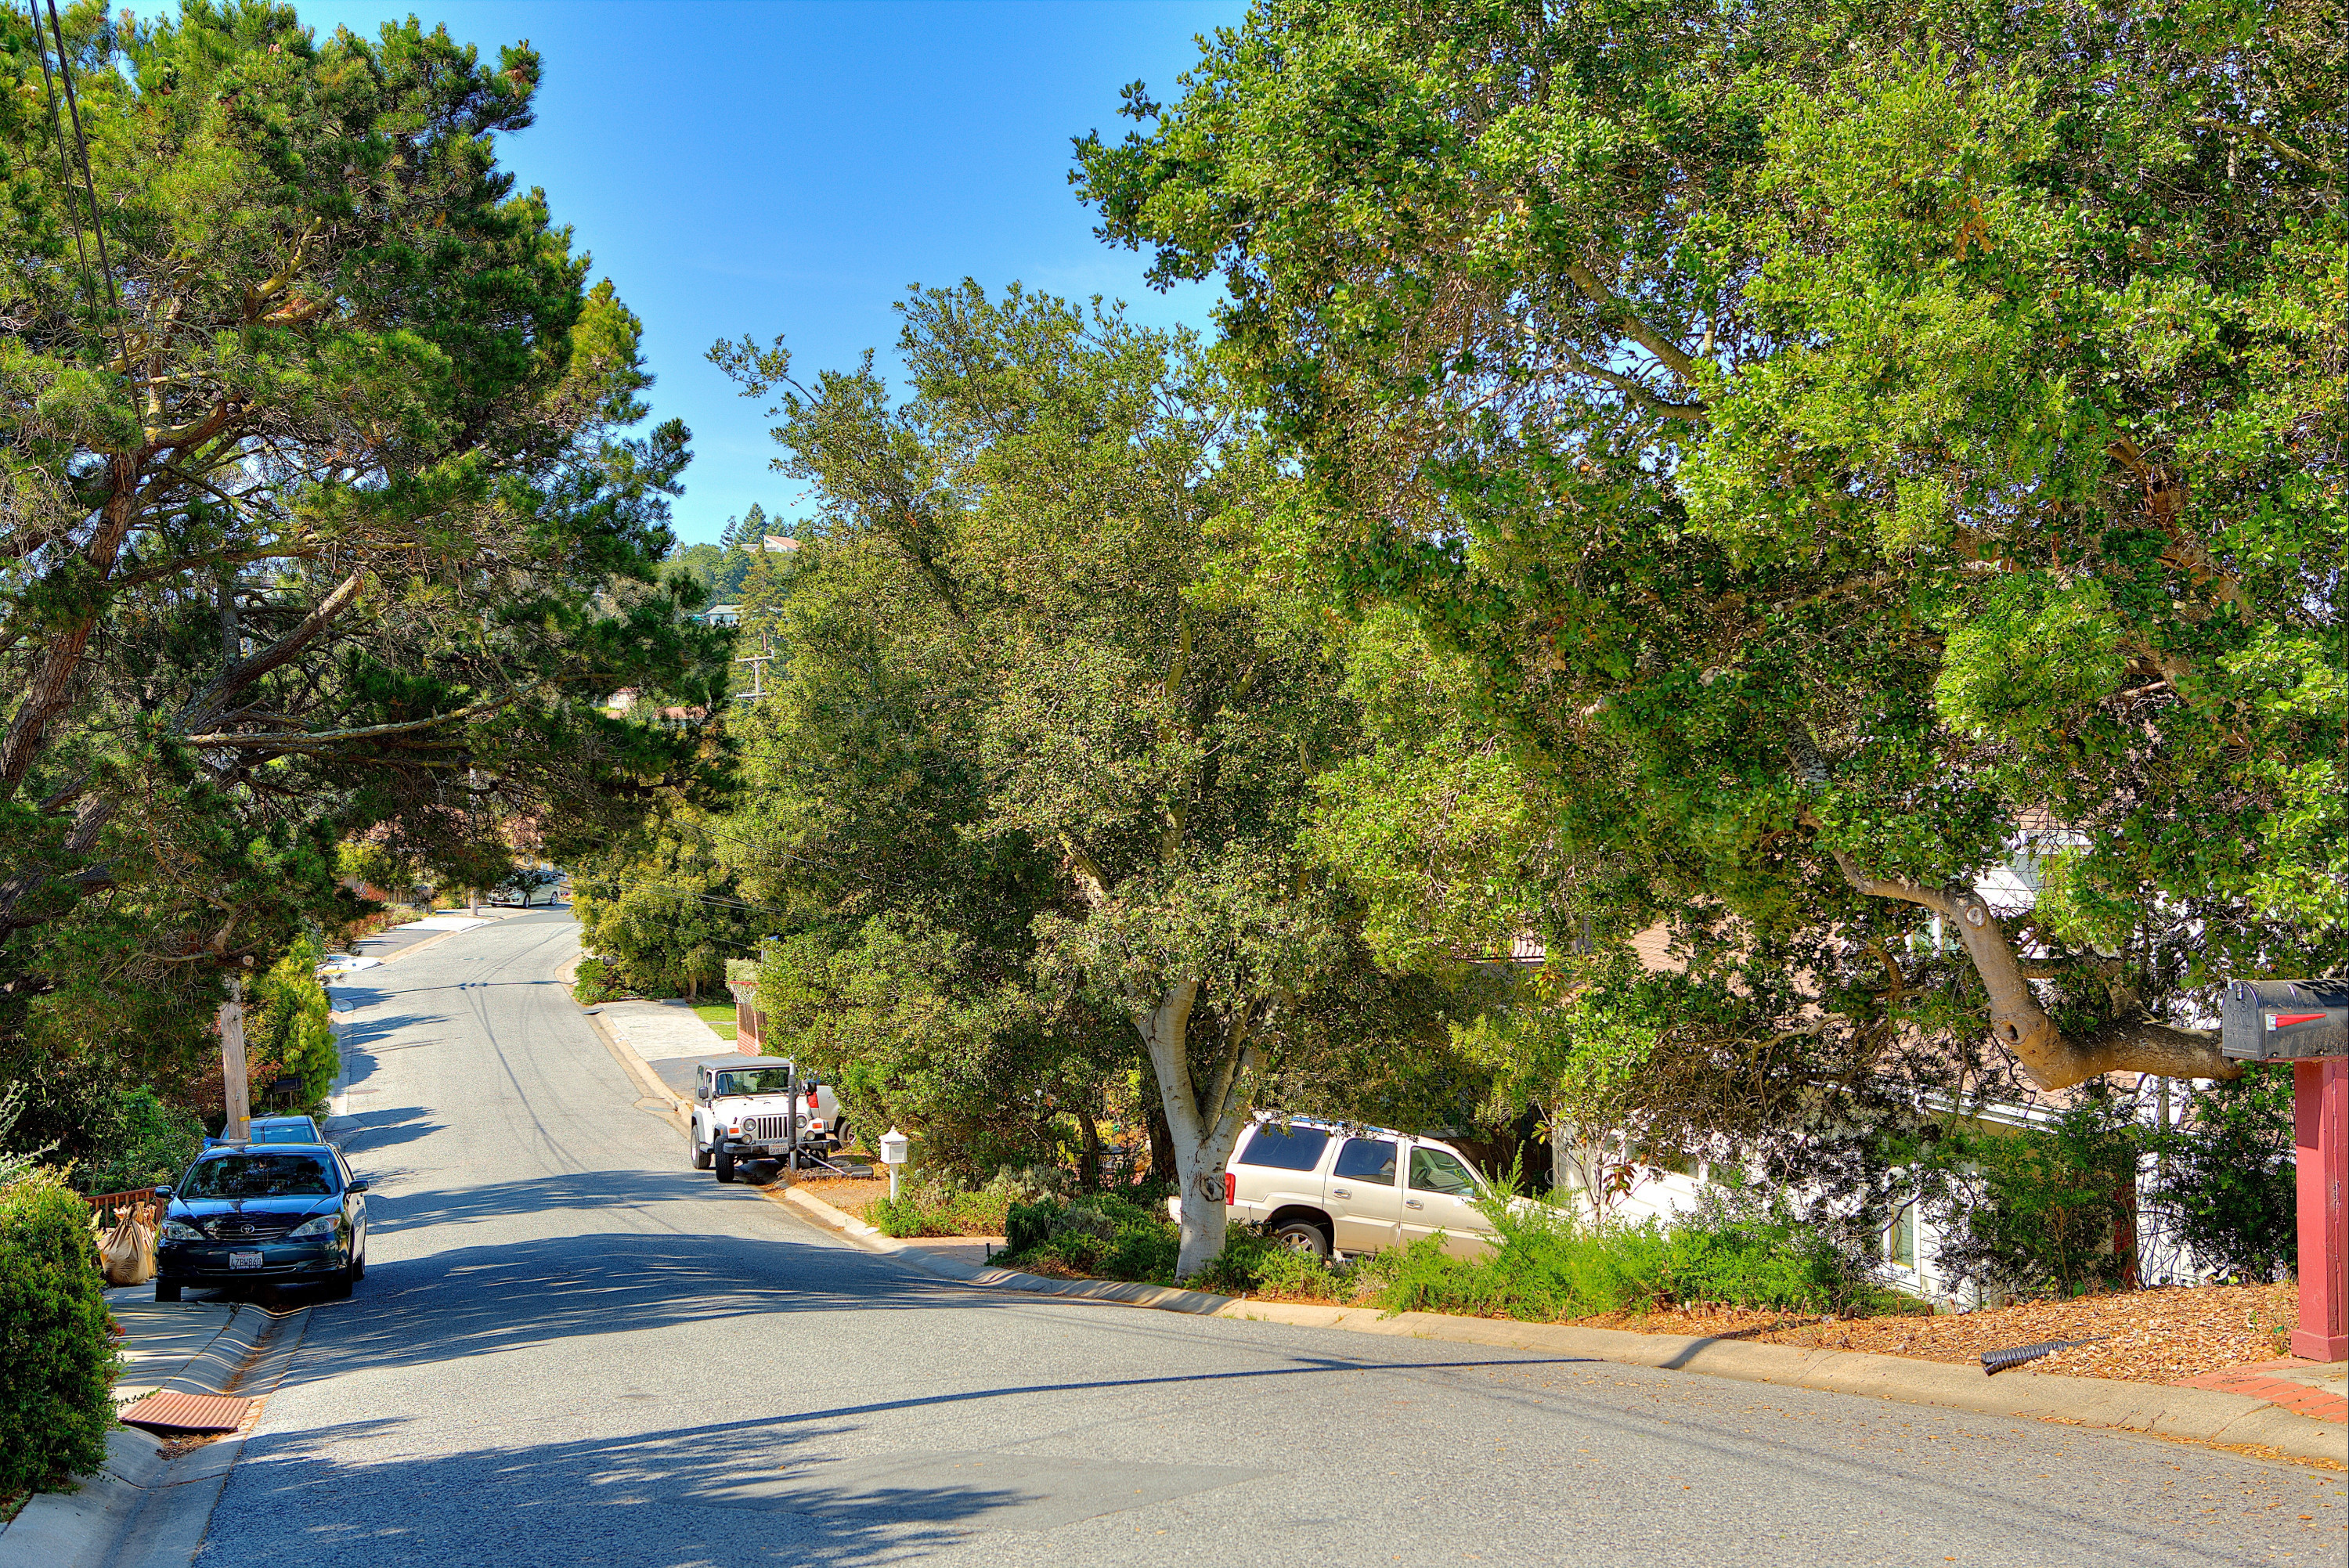 Street view with cars and trees  in the Antique Forest Homes area in Belmont